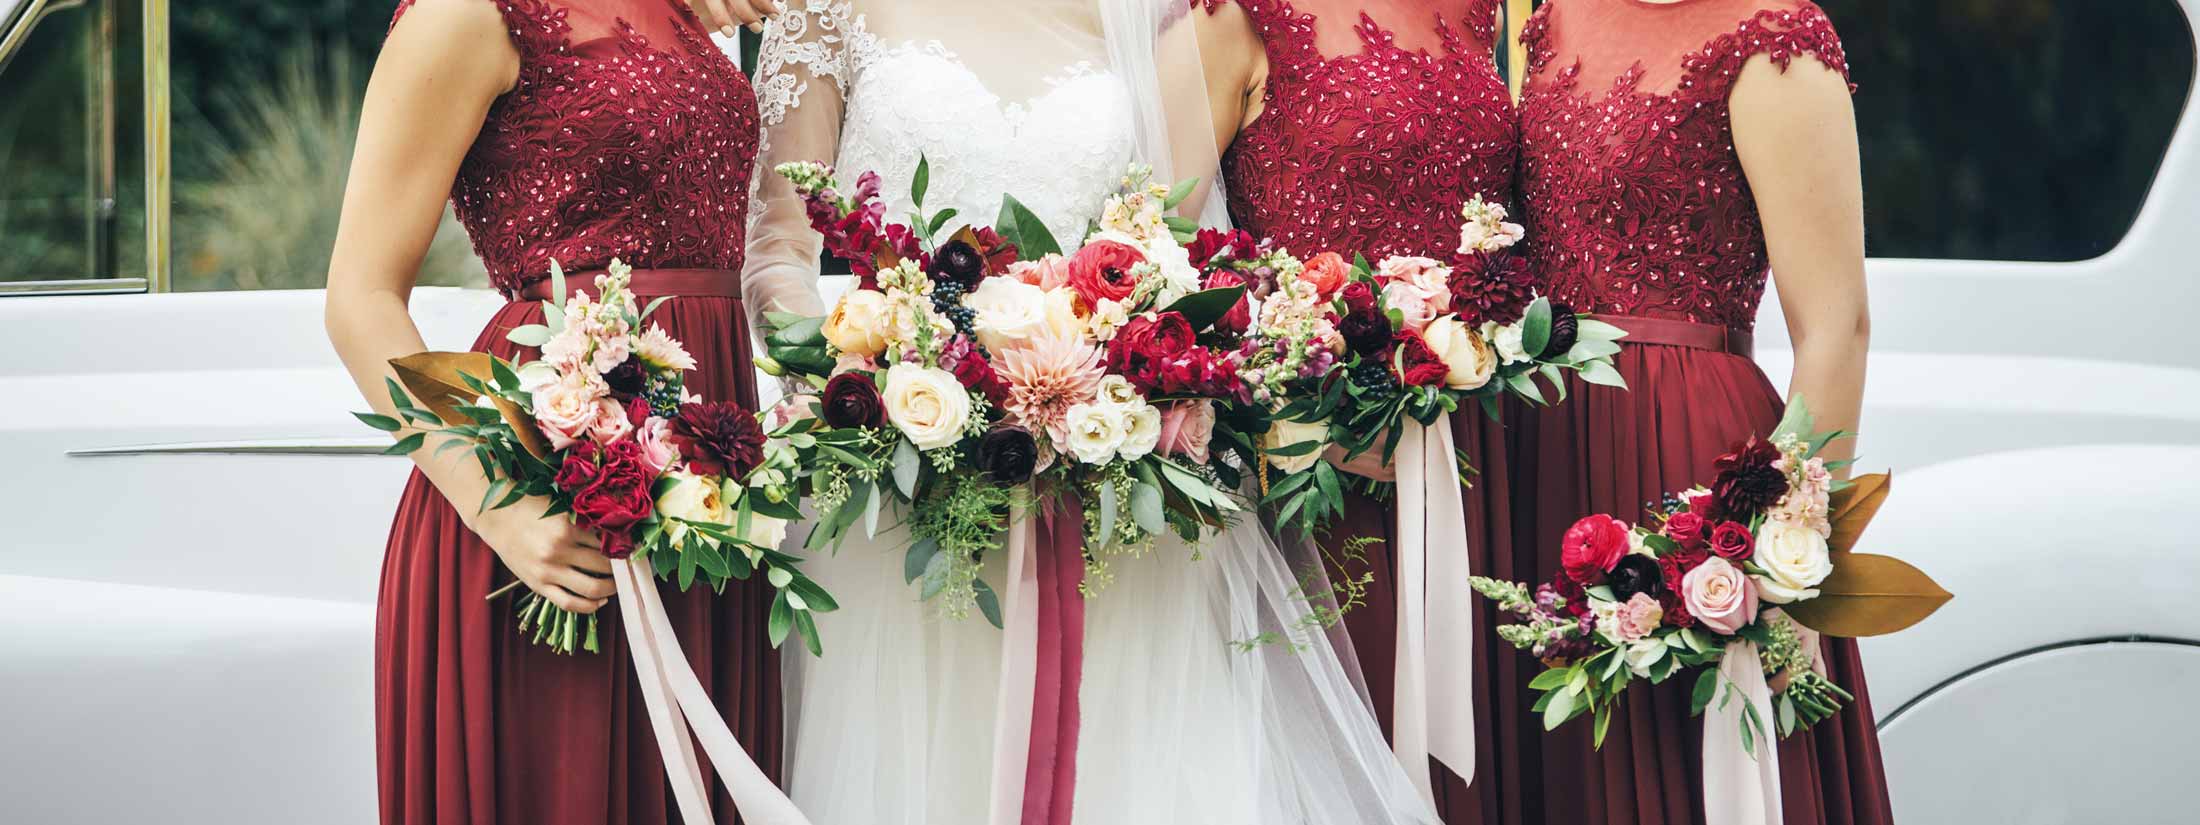 7 Ways To Make Your Wedding Entourage Stand Out